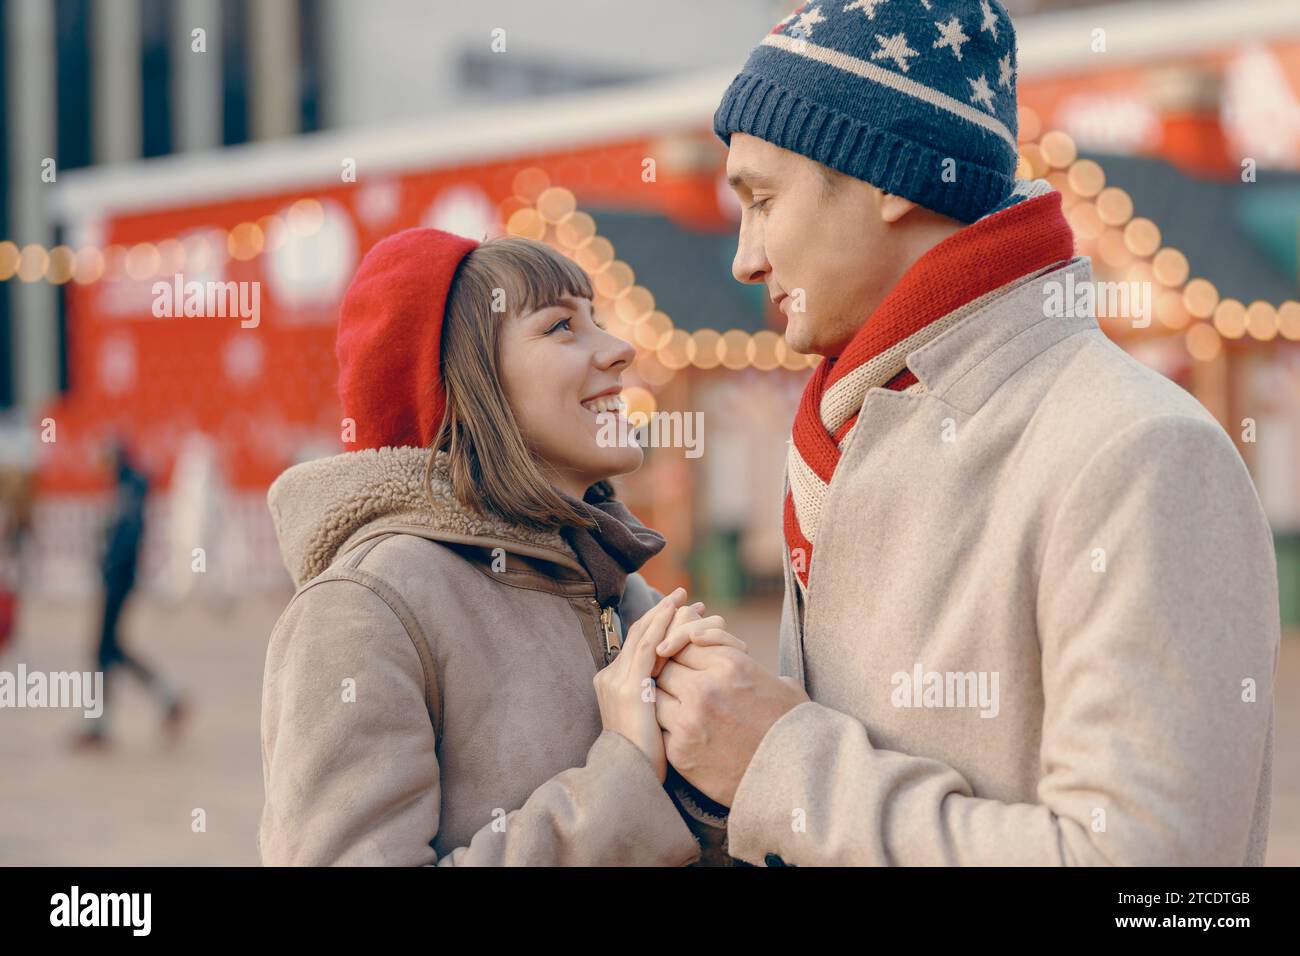 Smiling couple holding hands with a picturesque Christmas market behind them Stock Photo